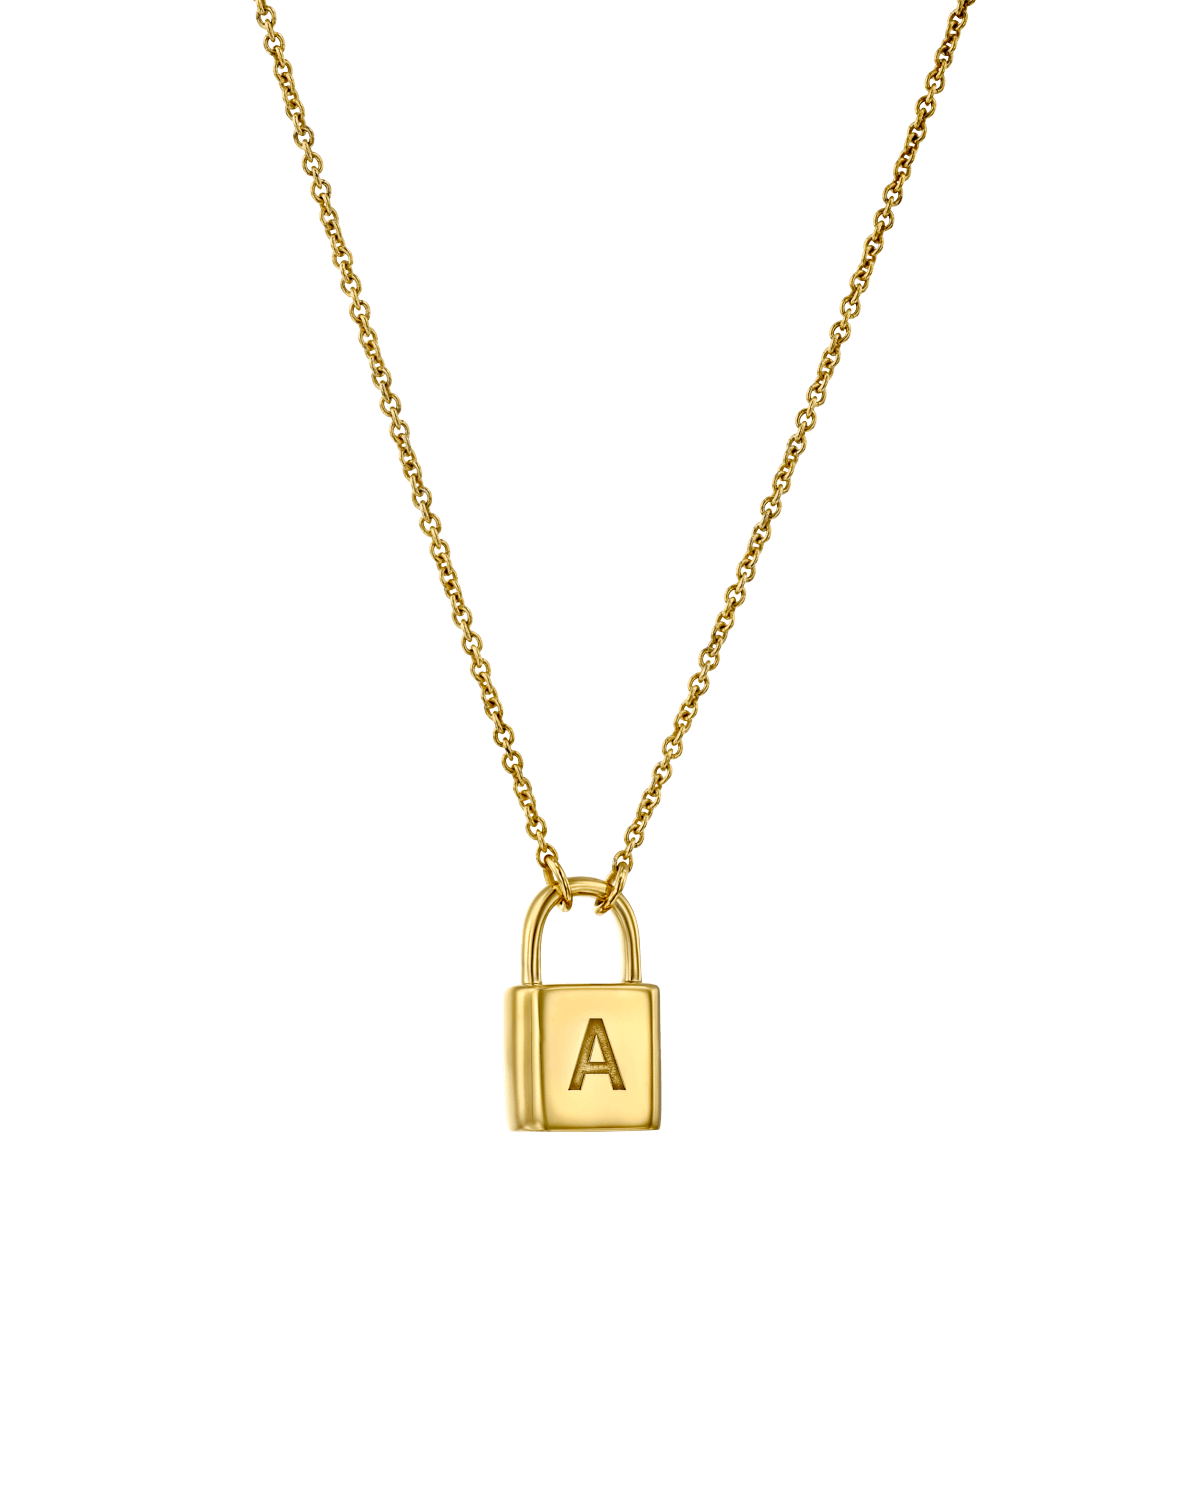 18K Gold Plated Initial Lock Pendant Necklace